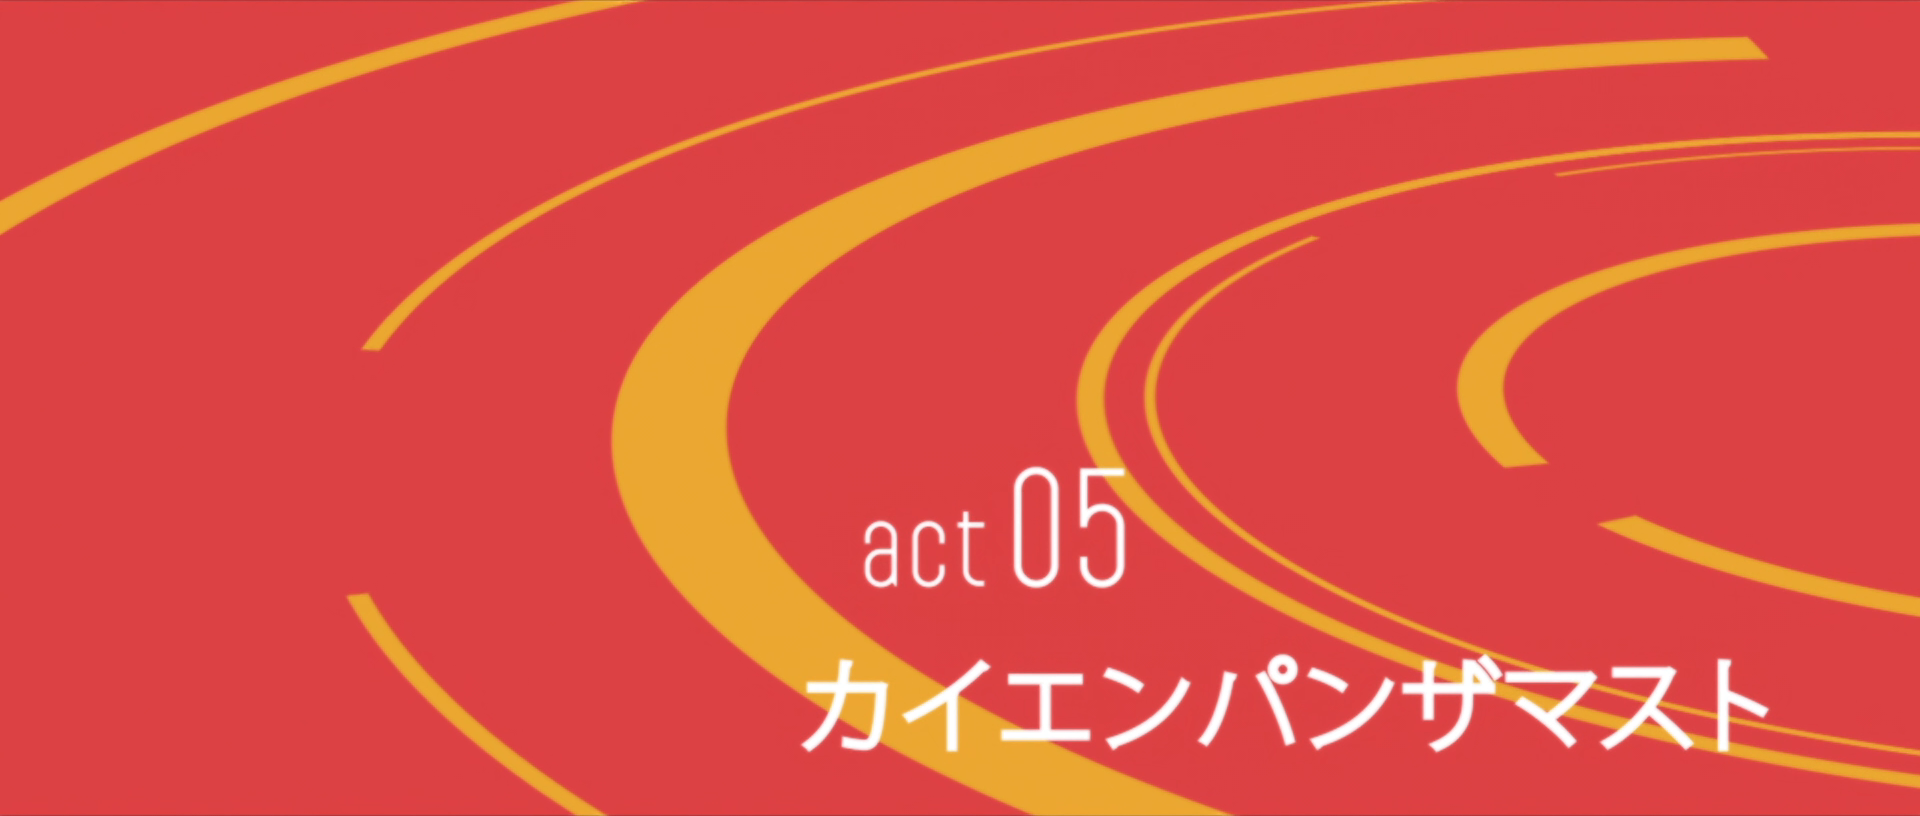 Mekaku City Actors episodes 1 and 2: Artificial Enemy and Kisaragi  Attention – Beneath the Tangles